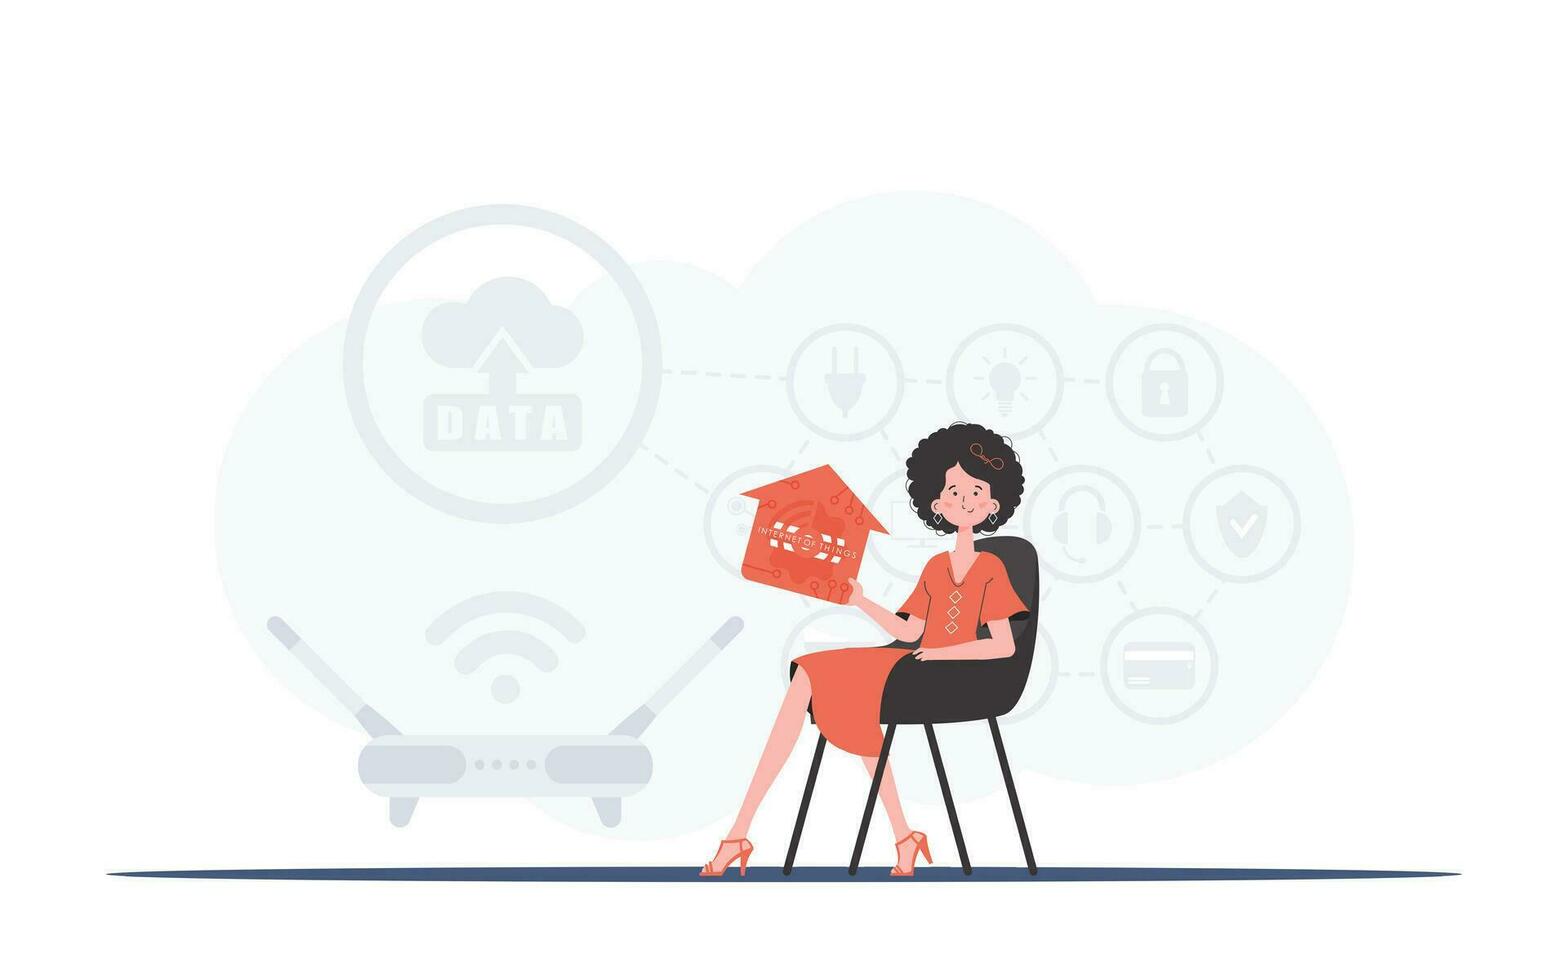 Internet of things concept. The girl sits in a chair and holds an icon of a house in her hands. Good for websites and presentations. Vector illustration in trendy flat style.